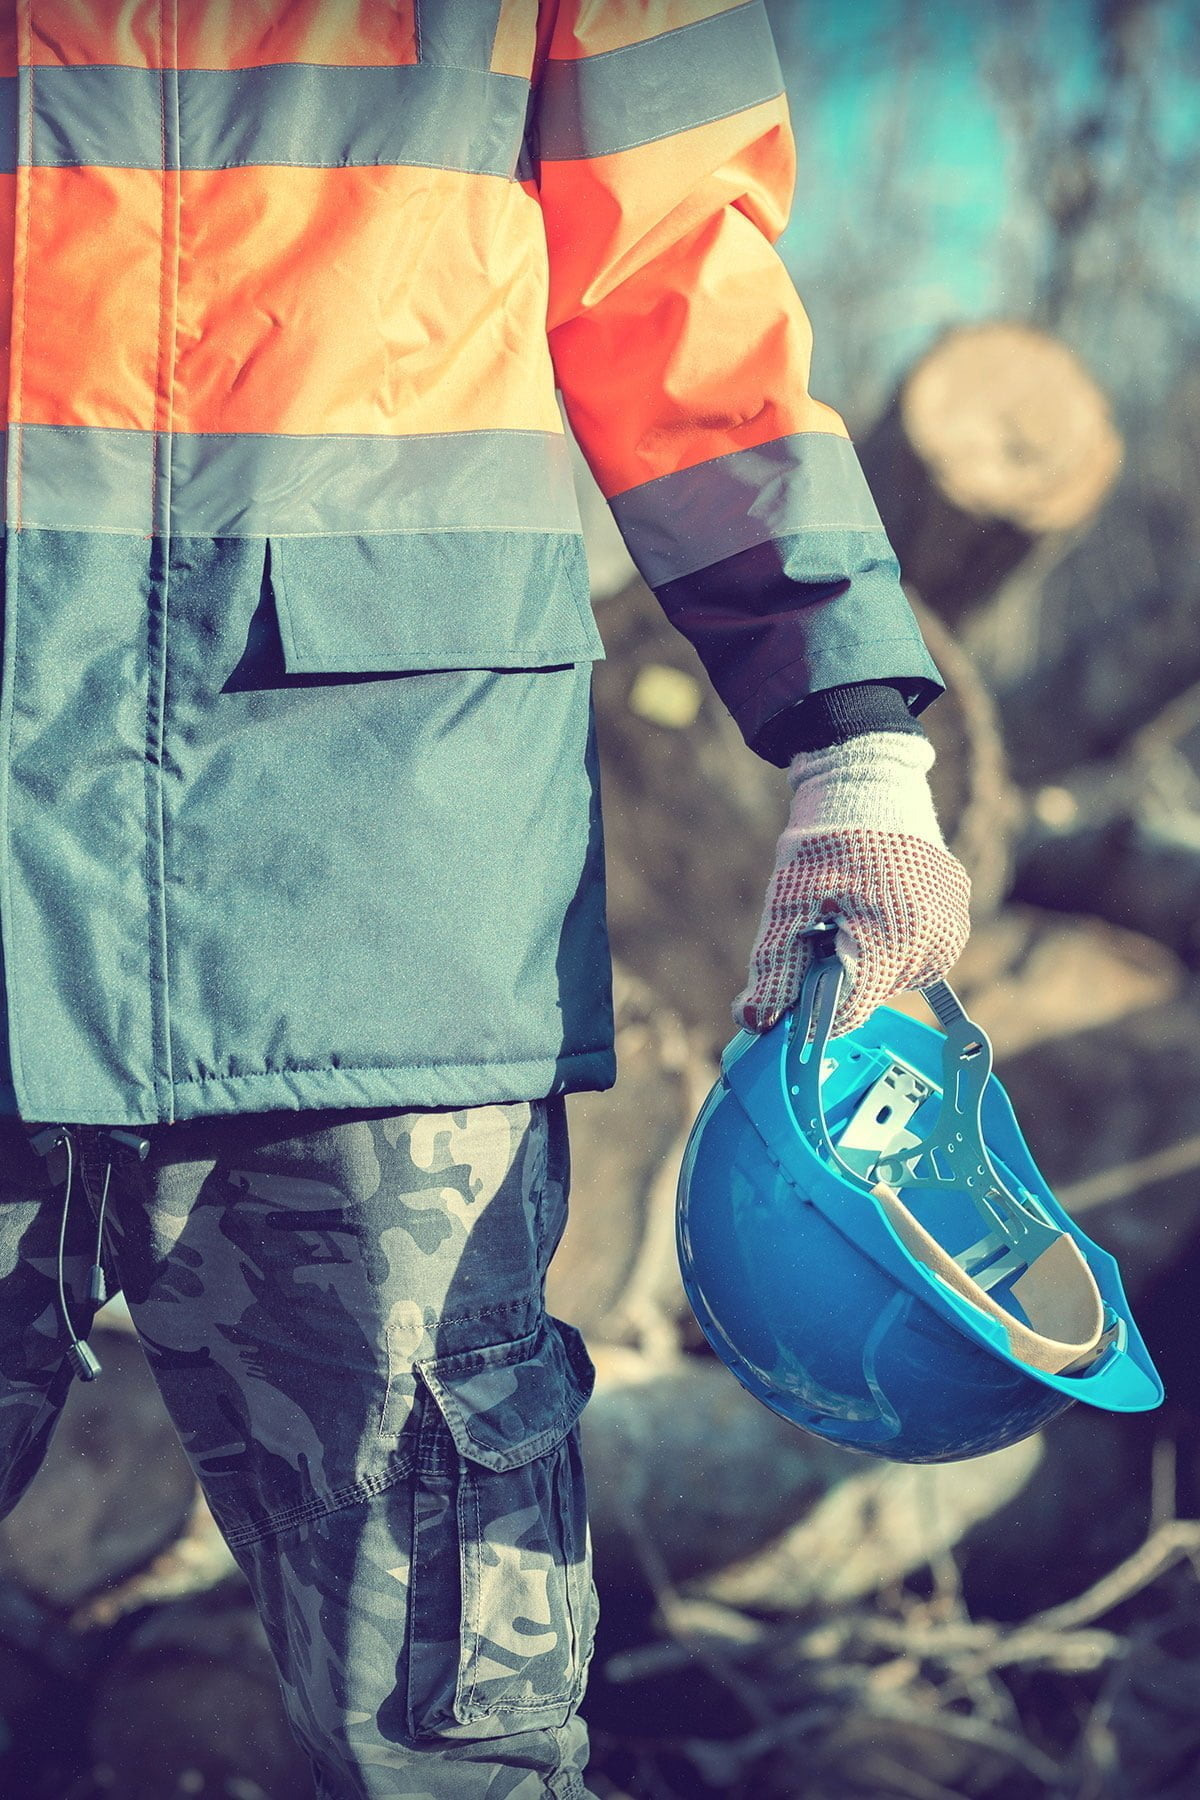 Image of apprentice working in field holding safety helmet